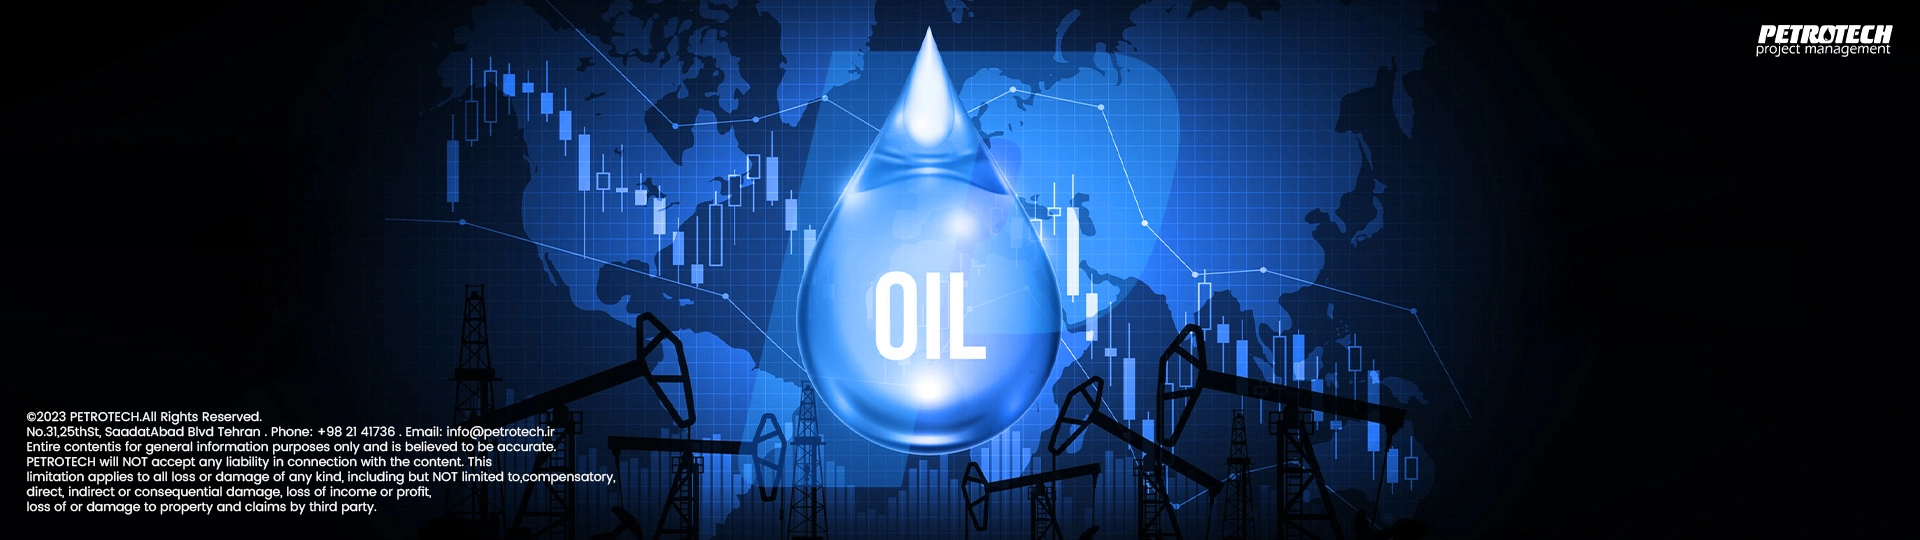 Oil price rally continues on strong summer demand outlook